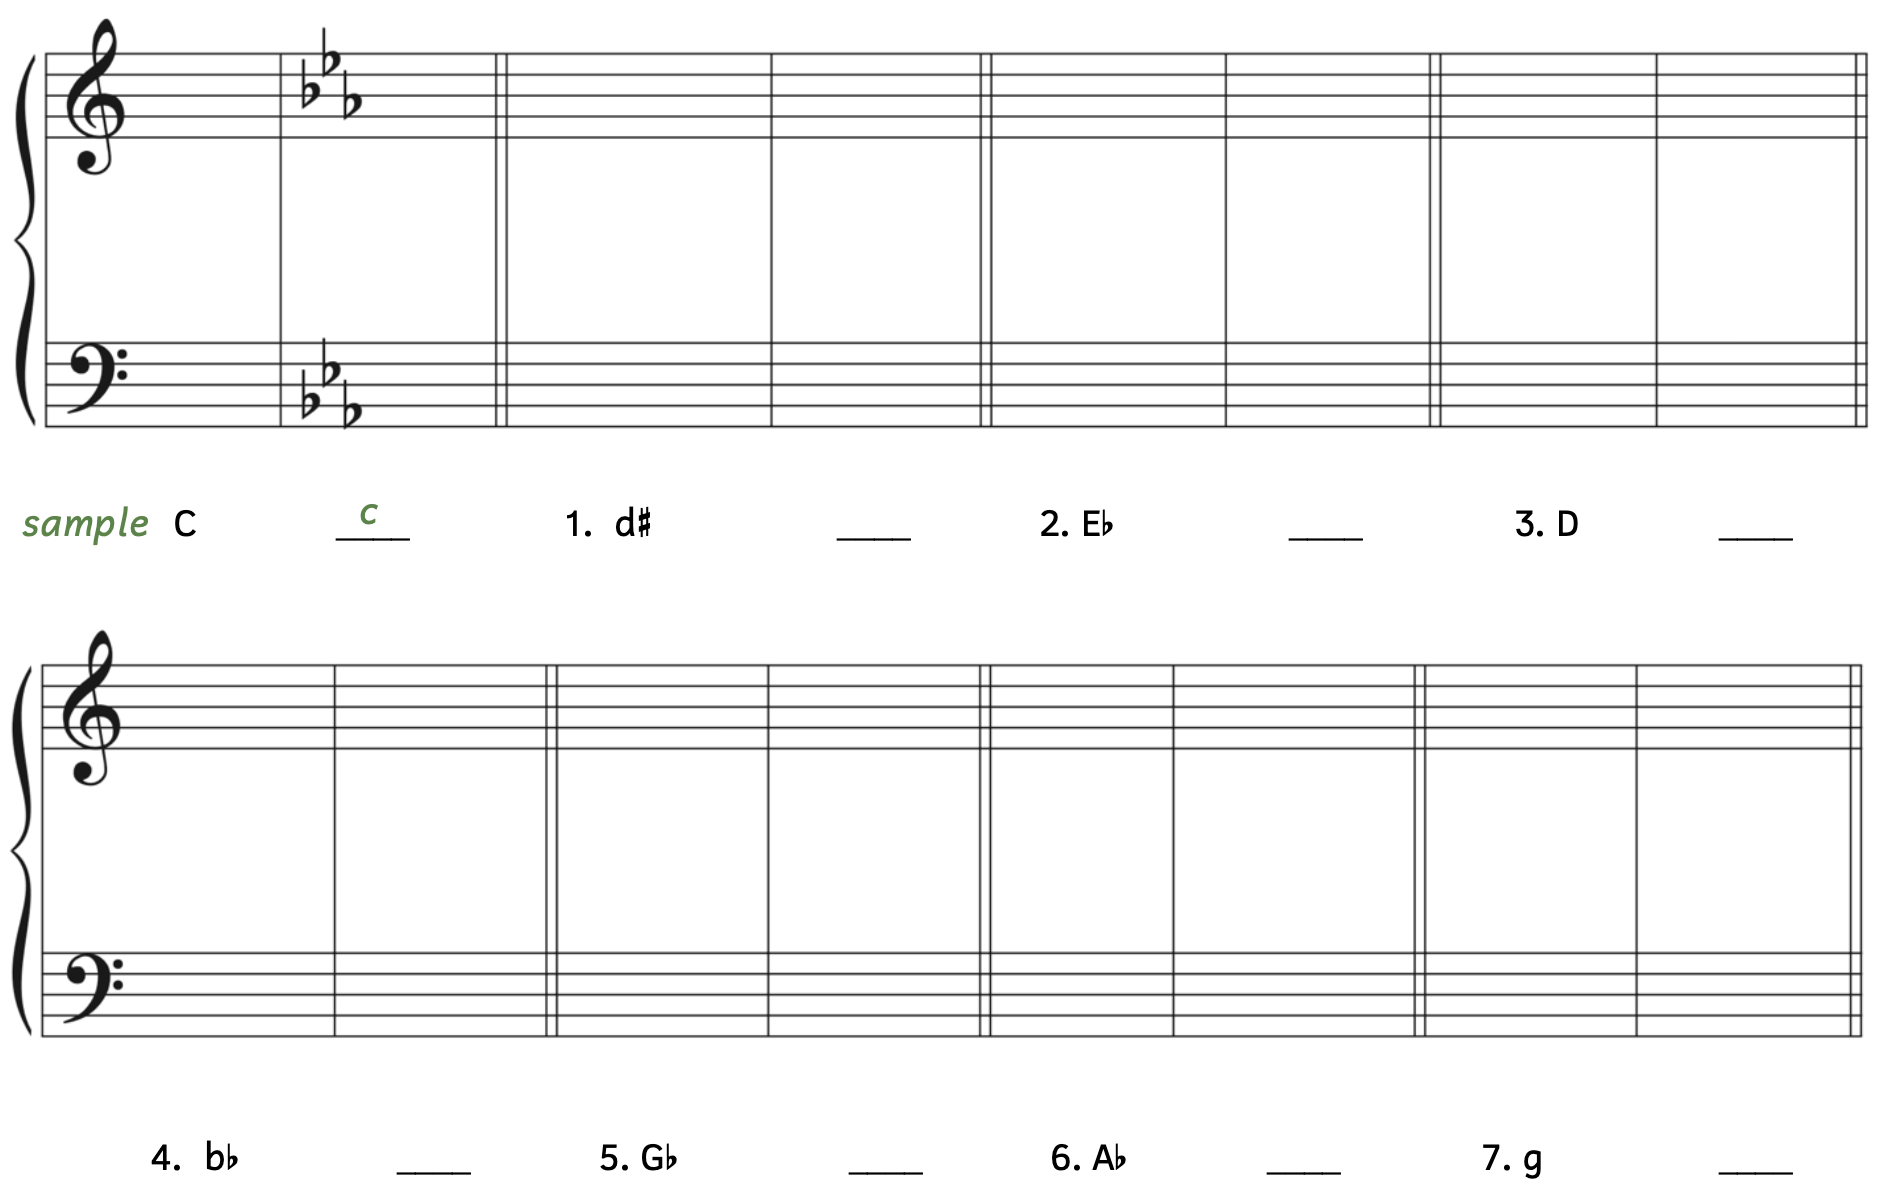 Number 1, write the parallel major of D-sharp minor, then both key signatures if they exist. Number 2, write the parallel minor of E-flat major, then both key signatures if they exist. Number 3, write the parallel minor of D major, then both key signatures if they exist. Number 4, write the parallel major of B-flat minor, then both key signatures if they exist. Number 5, write the parallel minor of G-flat major, then both key signatures if they exist. Number 6, write the parallel minor of A-flat major, then both key signatures if they exist. Number 7, write the parallel major of G minor, then both key signatures if they exist.